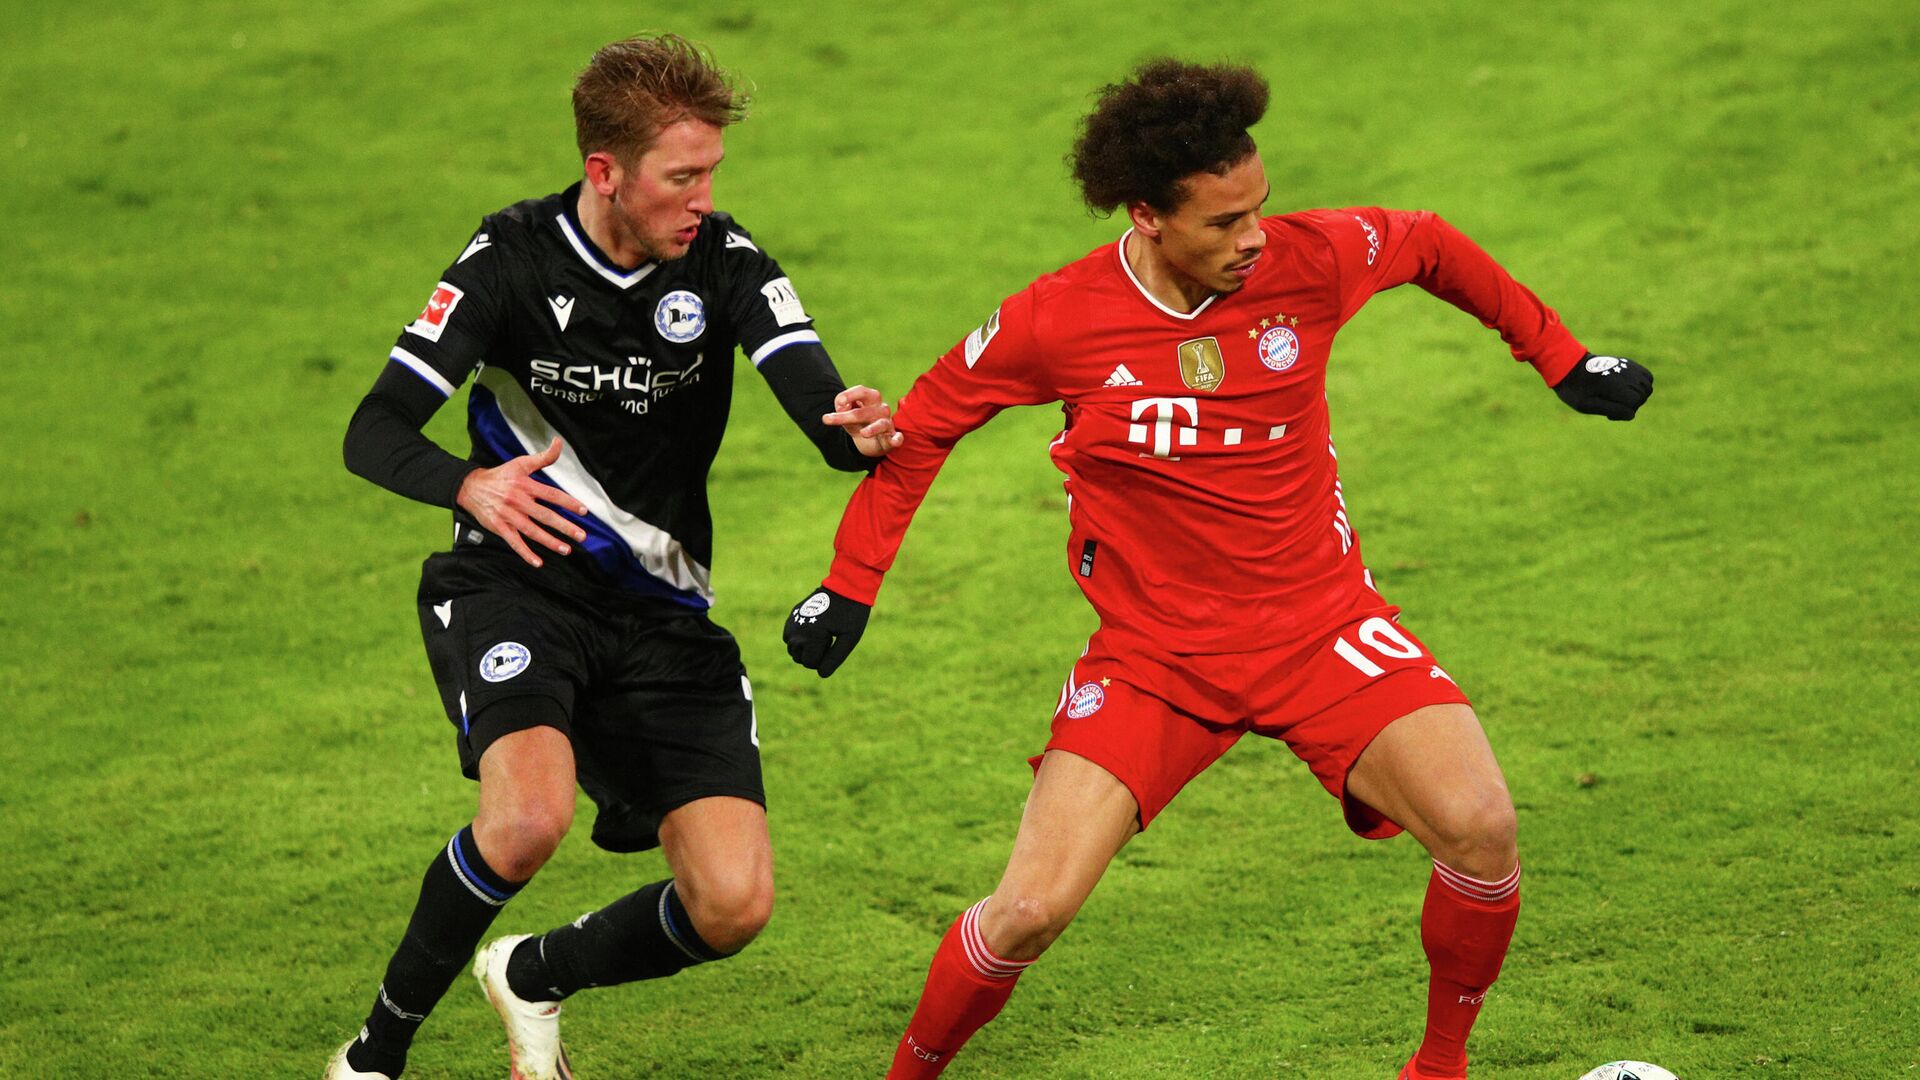 Bielefeld's Dutch forward Michel Vlap (L) and Bayern Munich's German midfielder Leroy Sane vie for the ball during the German first division Bundesliga football match FC Bayern Munich v DSC Armenia Bielefeld in Munich, southern Germany on February 15, 2021. (Photo by ADAM PRETTY / POOL / AFP) / DFL REGULATIONS PROHIBIT ANY USE OF PHOTOGRAPHS AS IMAGE SEQUENCES AND/OR QUASI-VIDEO - РИА Новости, 1920, 16.02.2021